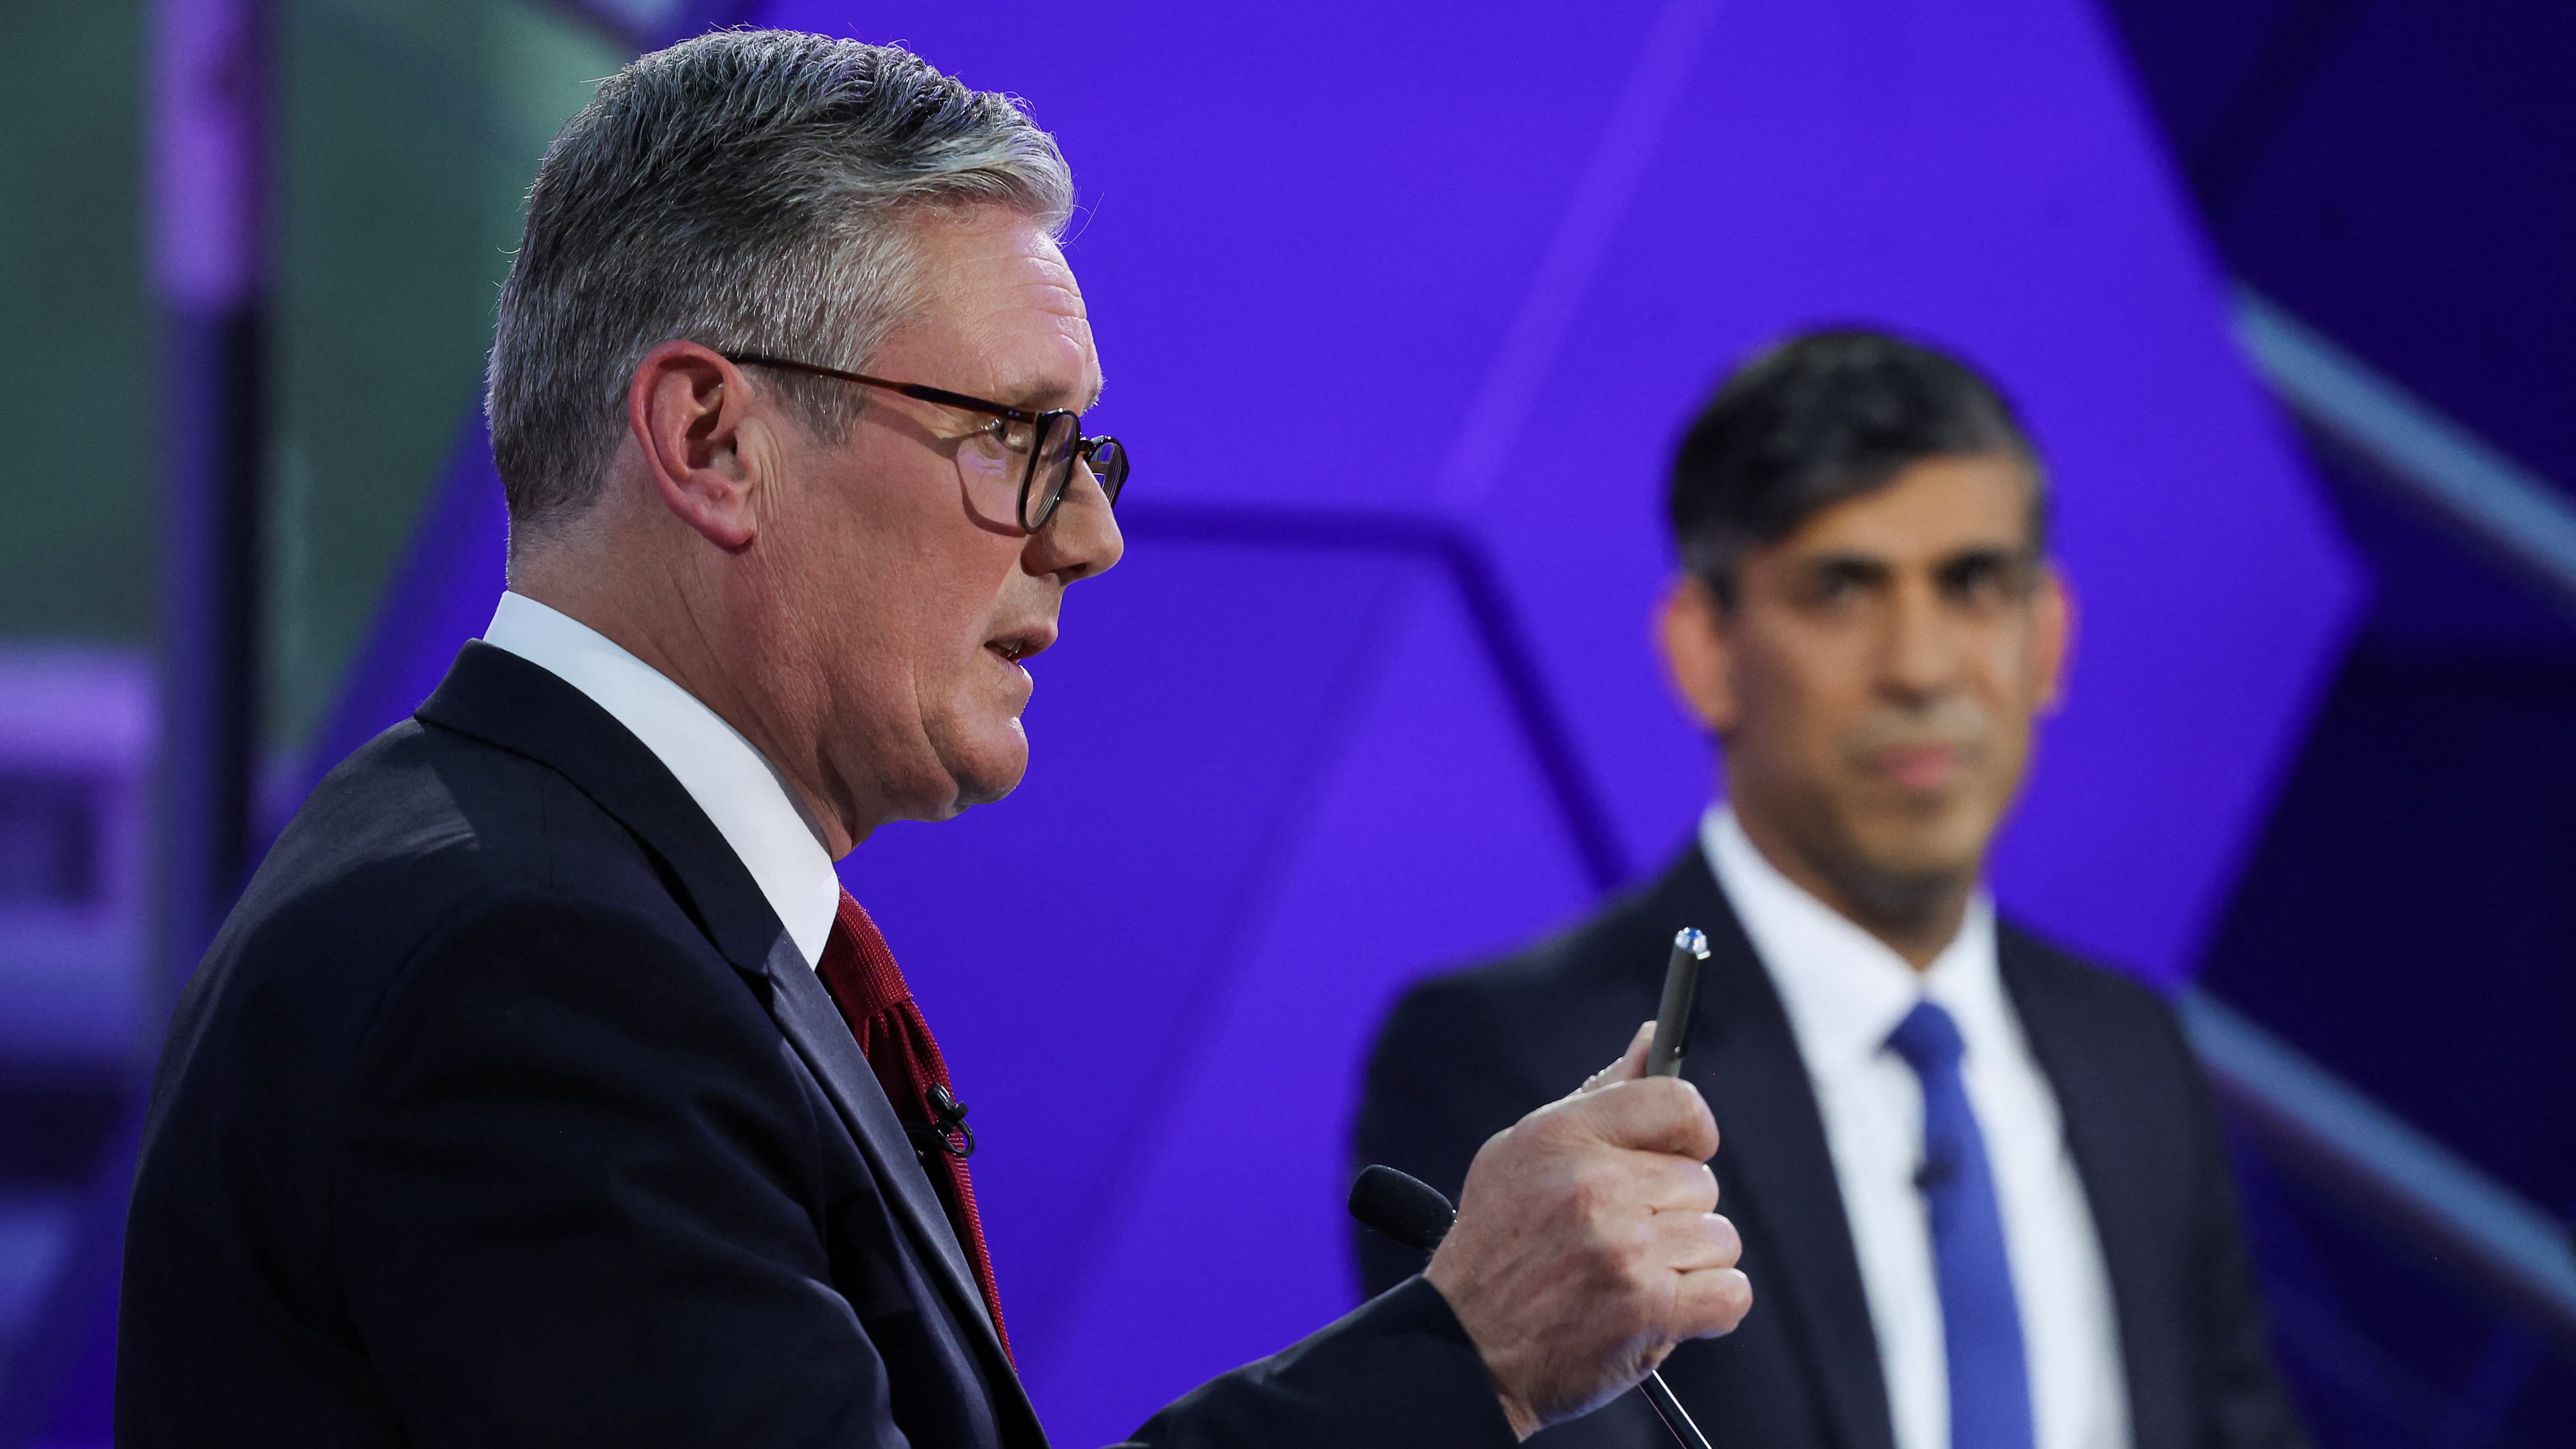 Labour leader Sir Keir Starmer and Prime Minister Rishi Sunak during their debate